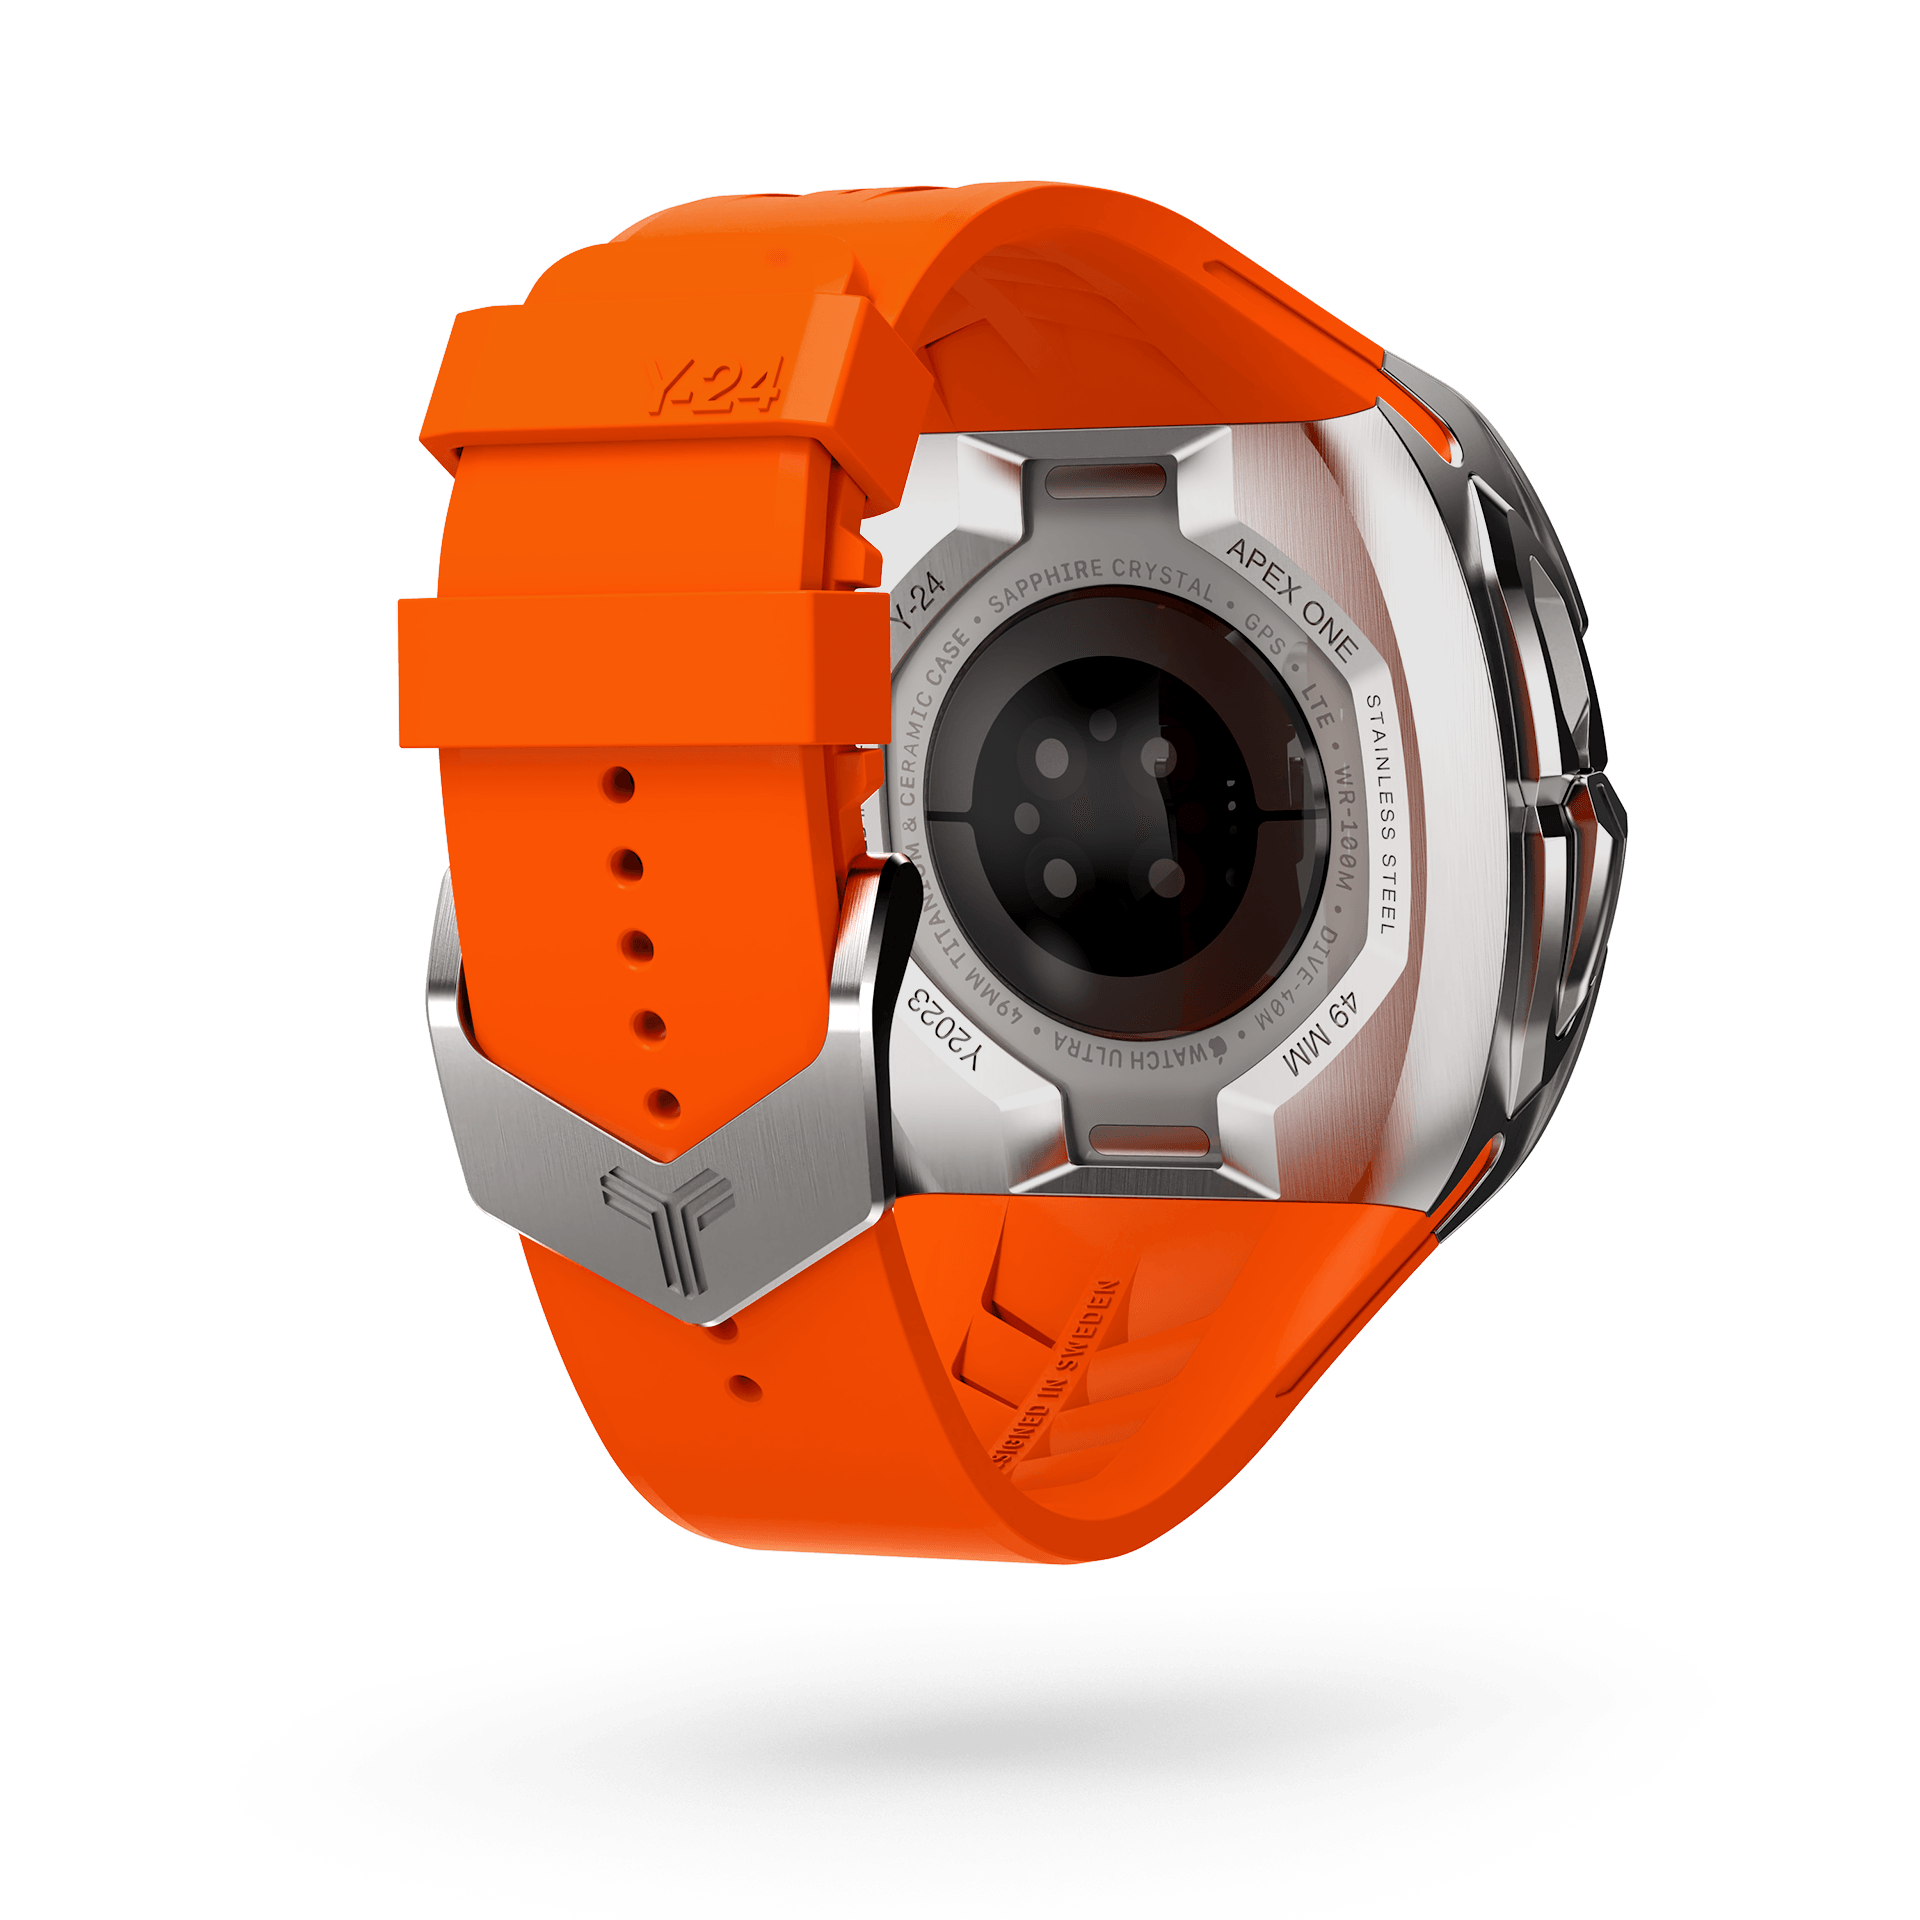 Y24 Shibuya 49mm Apple Watch Ultra Case. The image features a vibrant warning orange strap beautifully complemented by a sleek stainless steel bezel. 